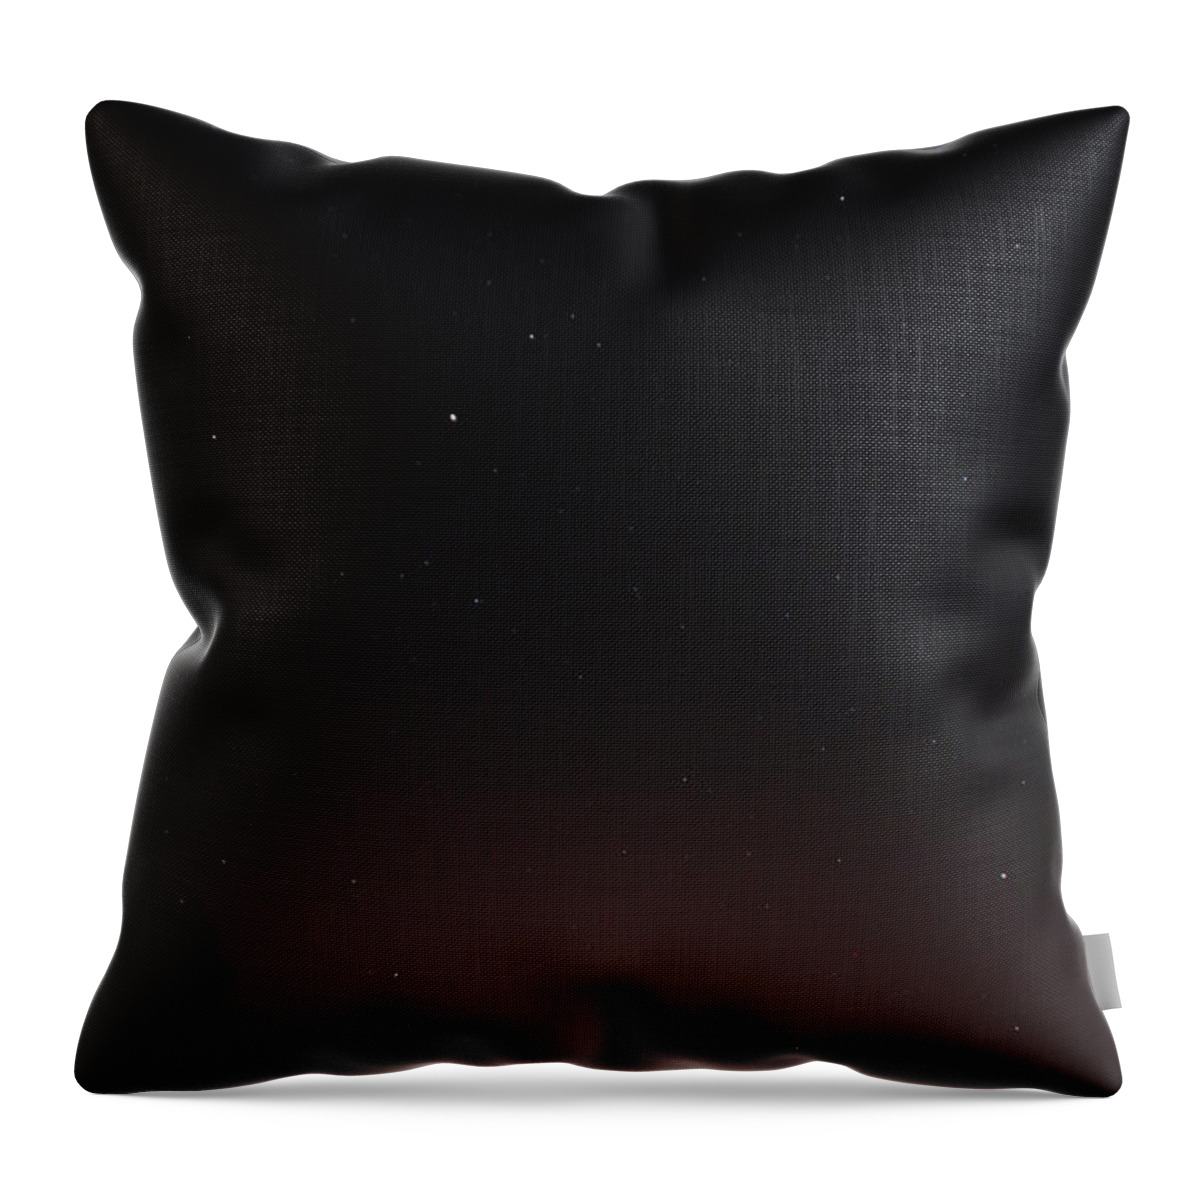 David S Reynolds Throw Pillow featuring the photograph Night over the city by David S Reynolds